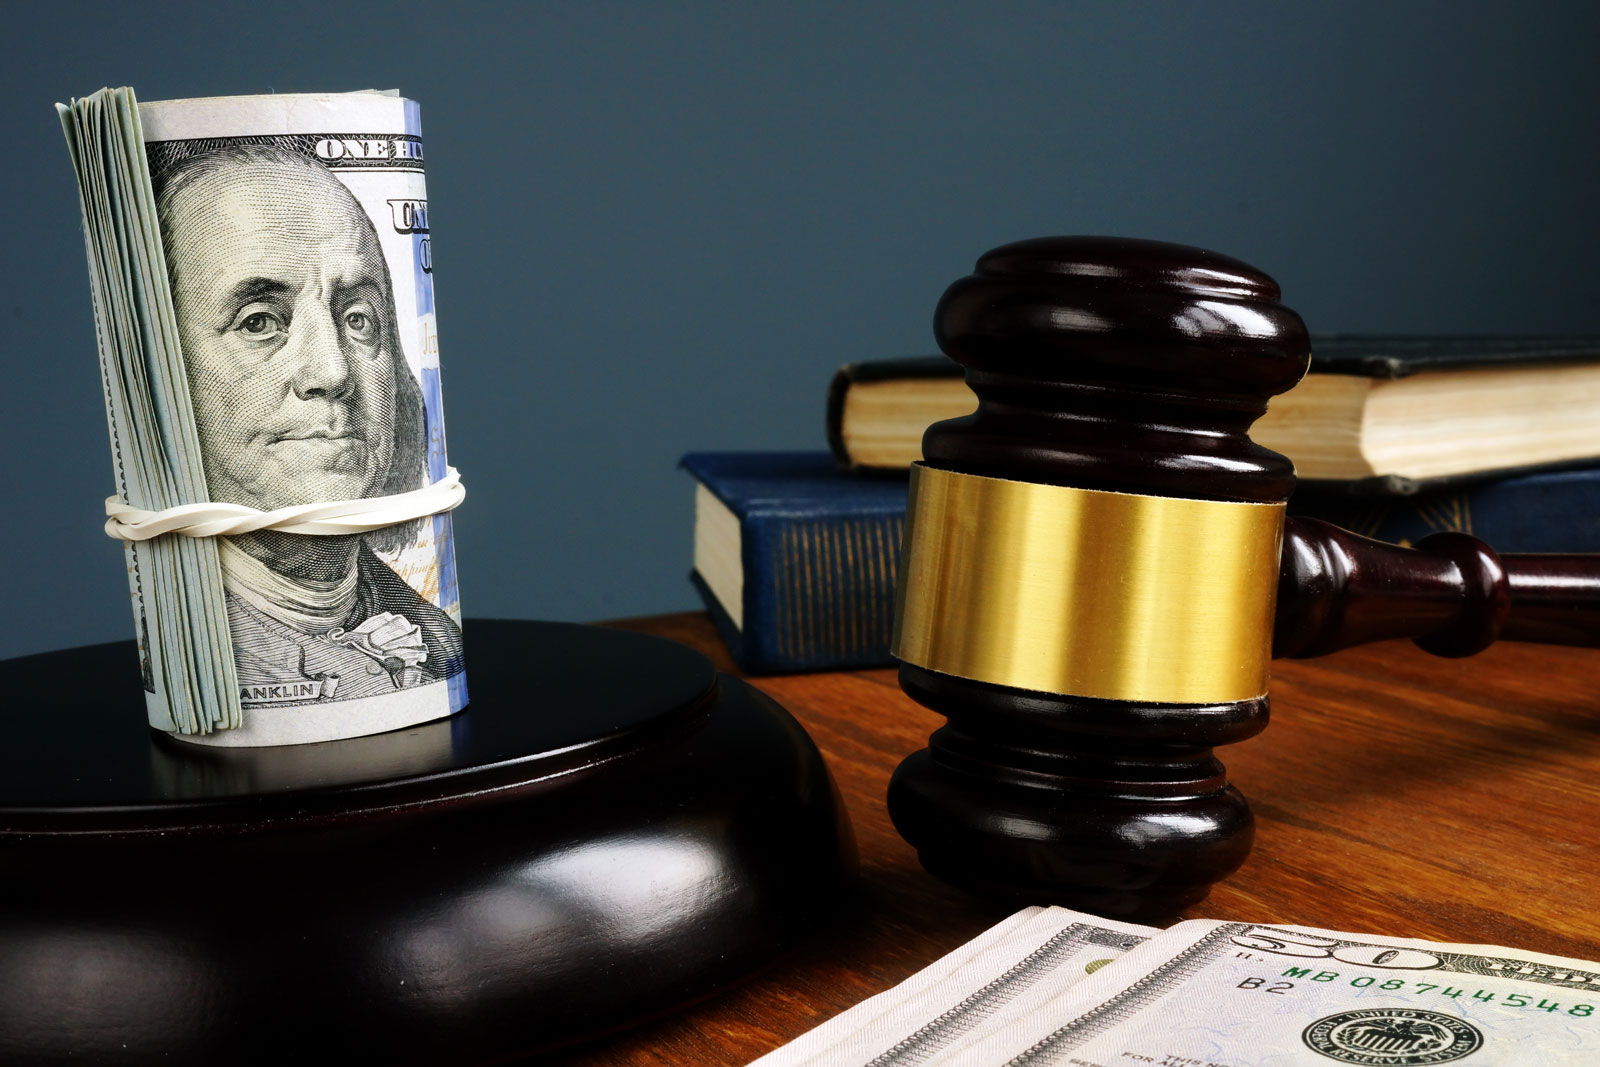 Types of Bail Bond Collateral